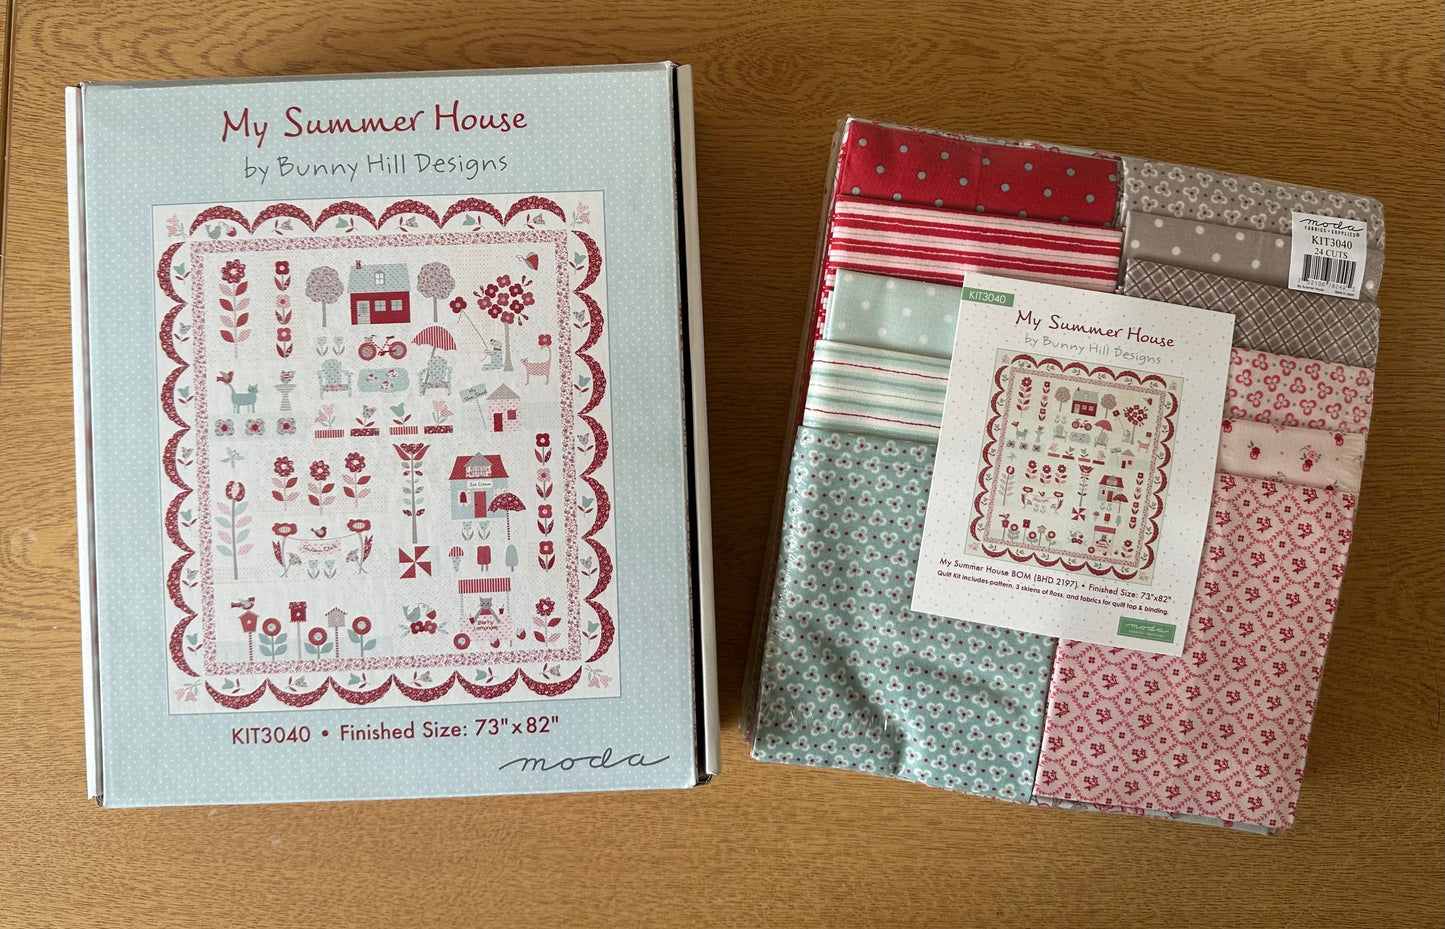 Mt Summer house kit box and fabric